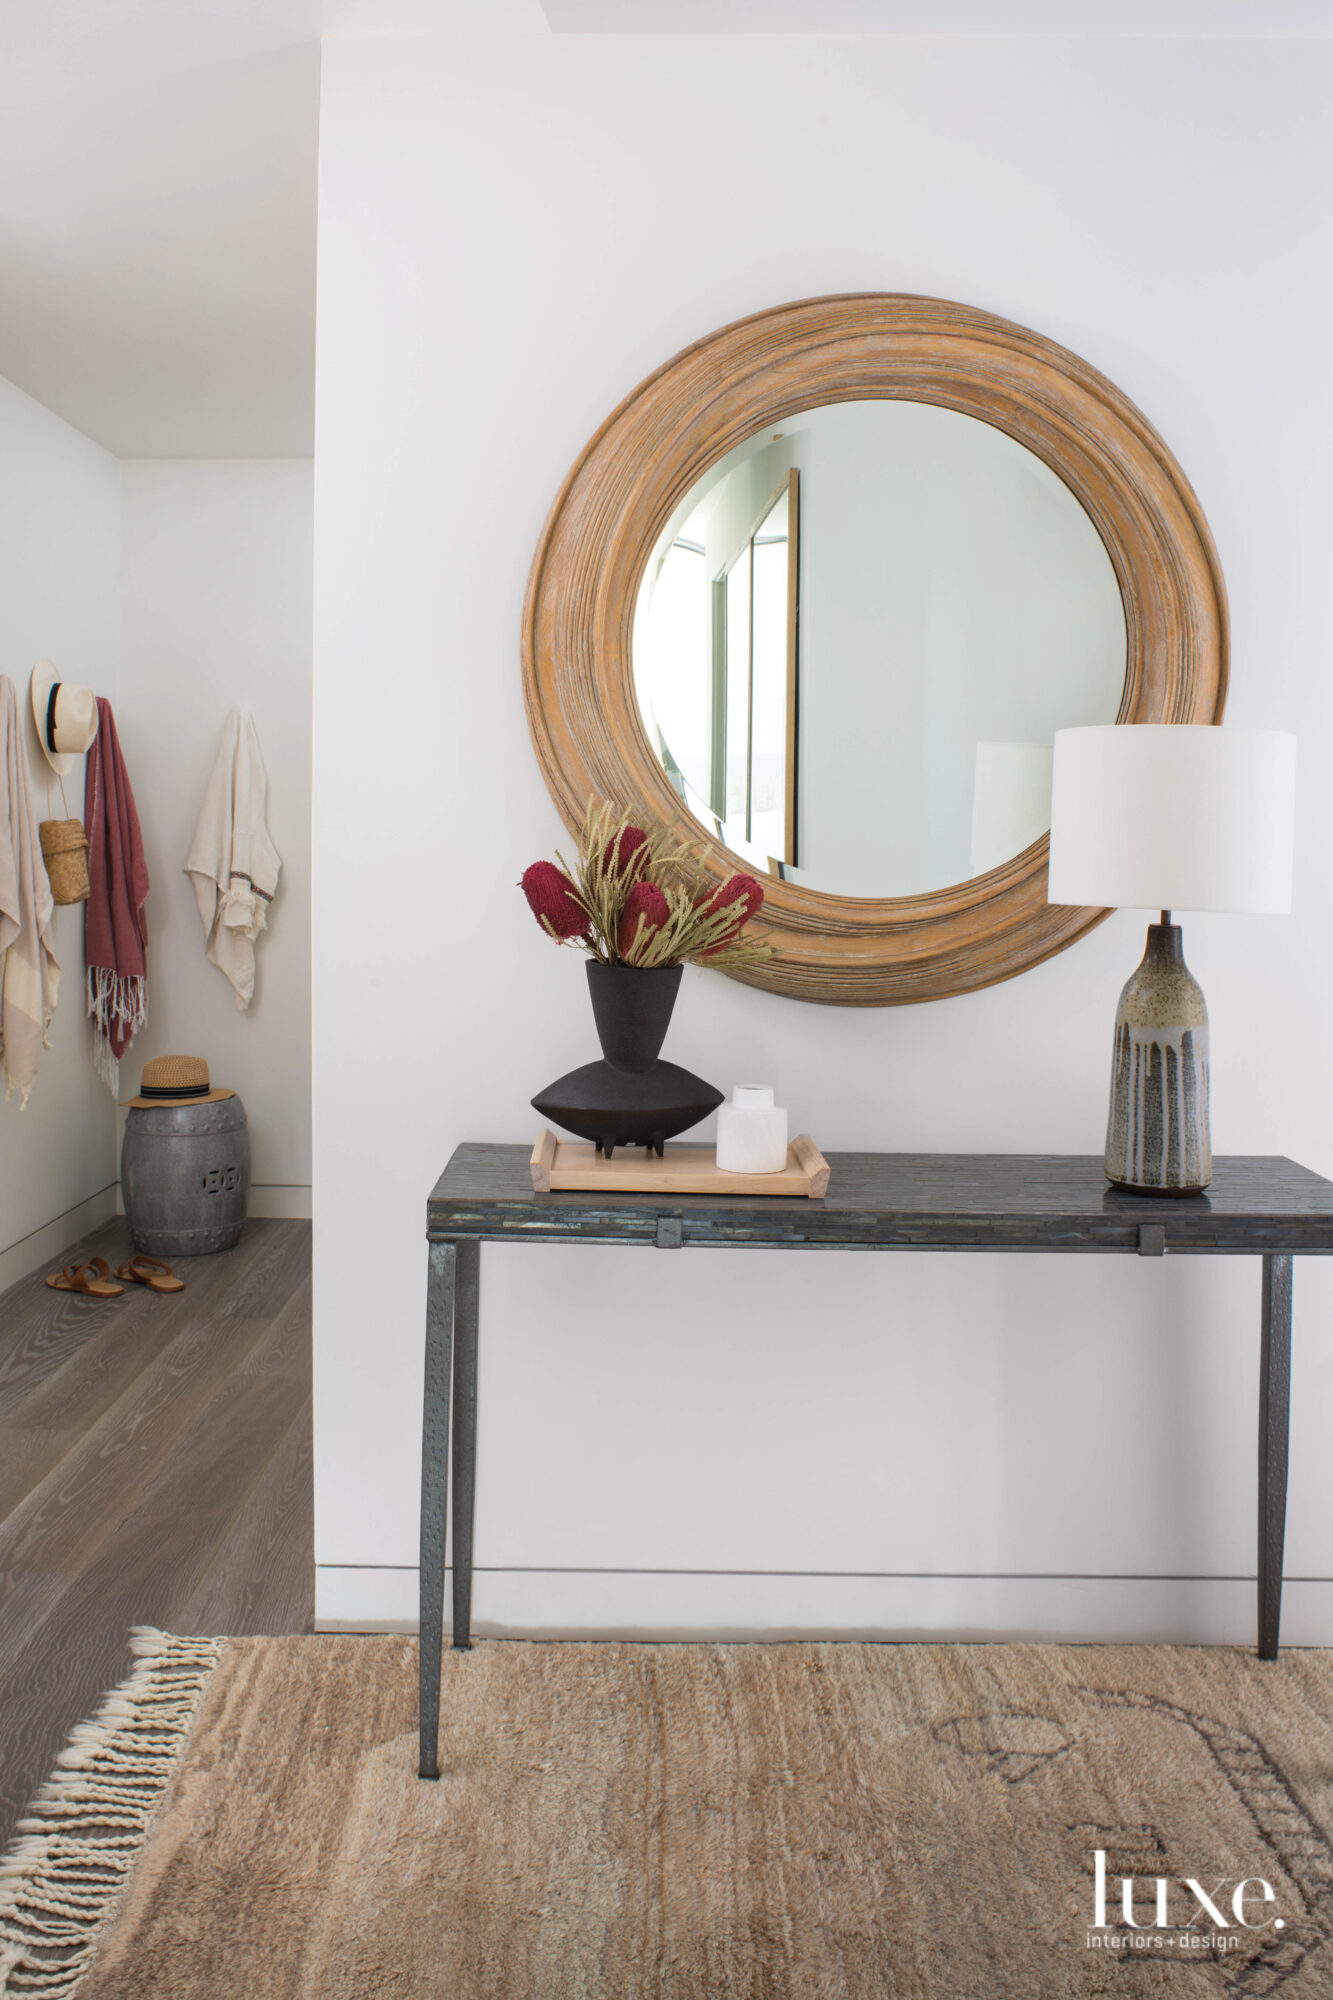 Detail of entry with a console table and mirror above.